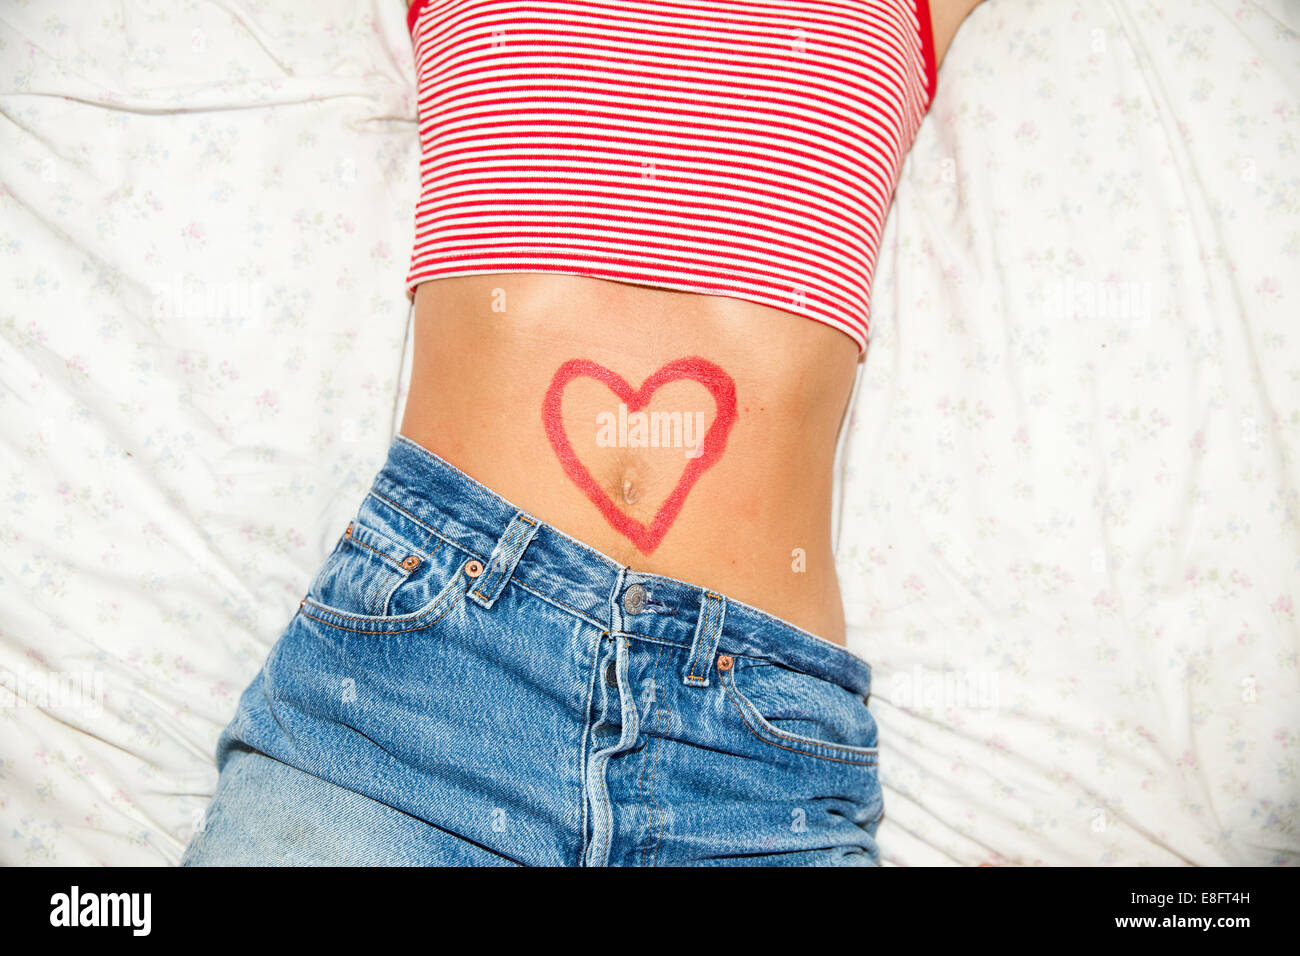 Heart shaped drawing on a woman's stomach Stock Photo